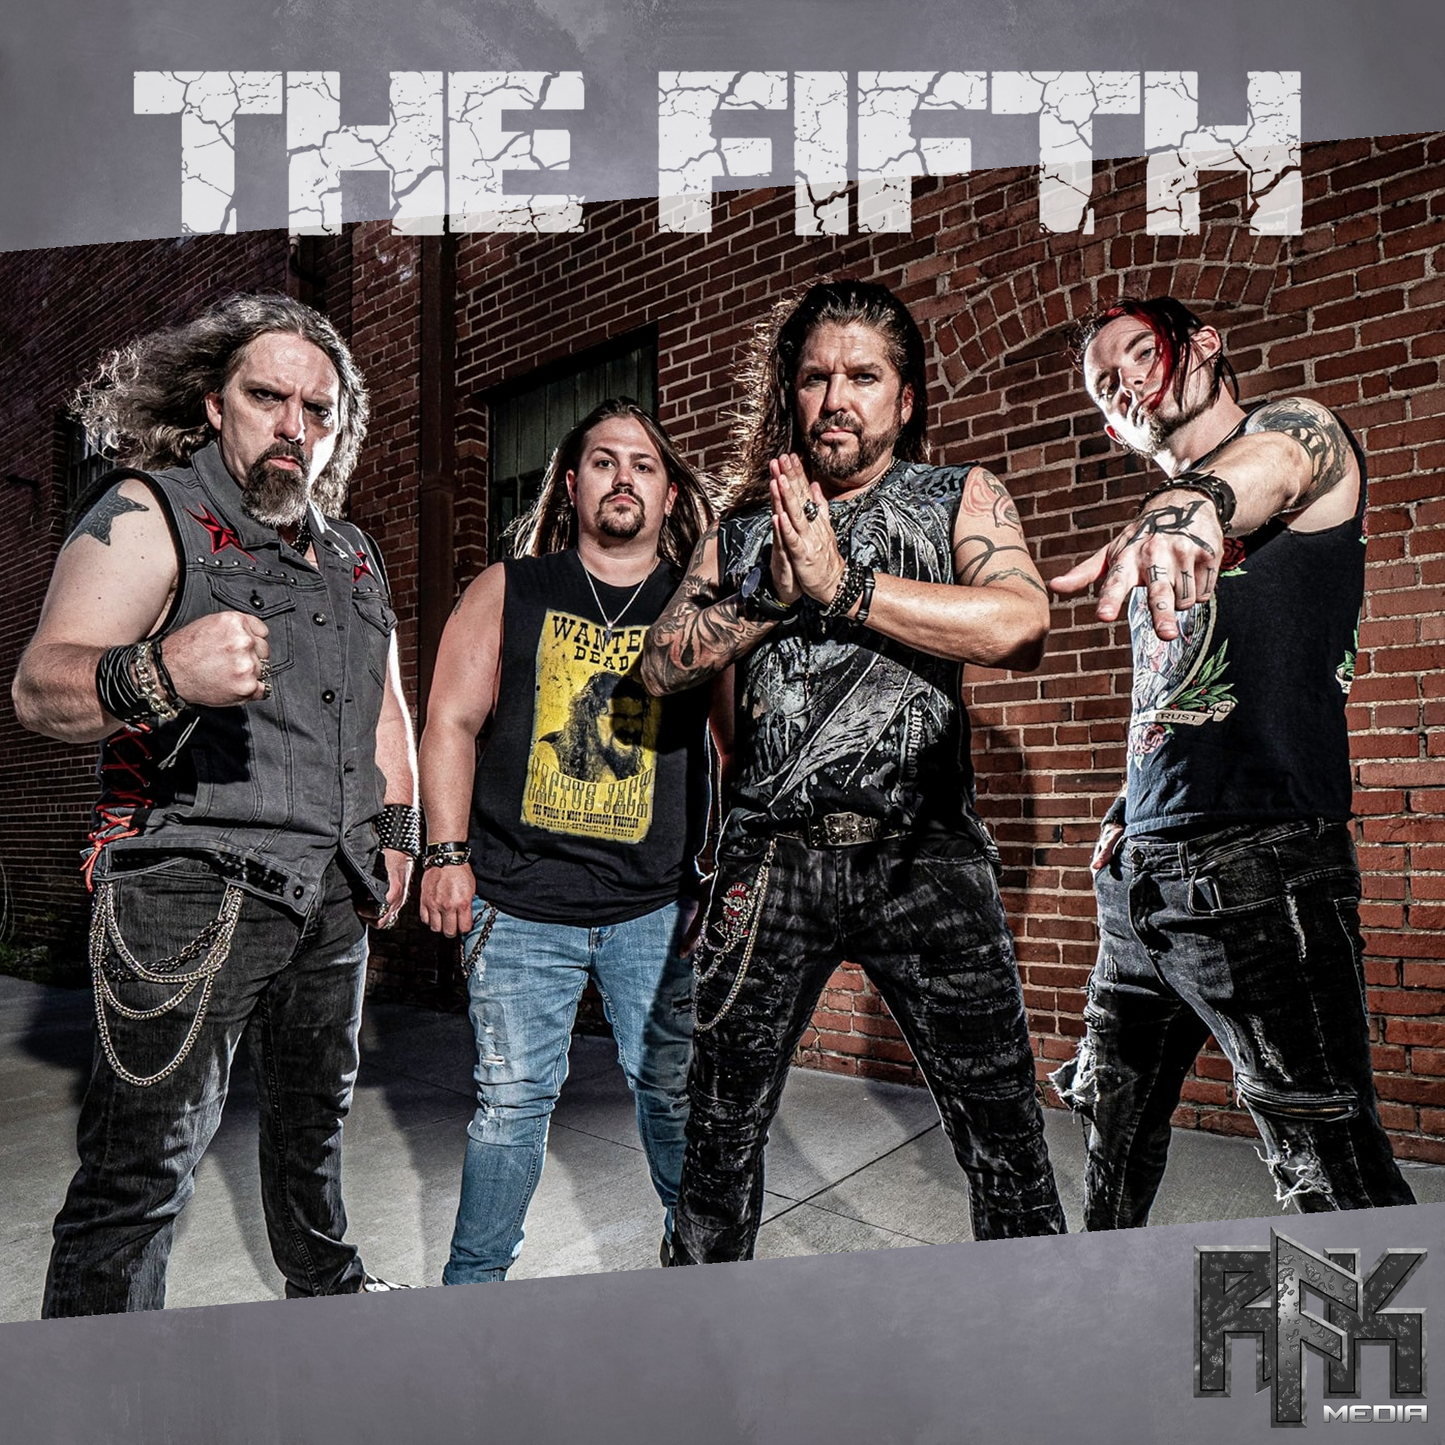 THE FIFTH - Signed 5-song CD/EP